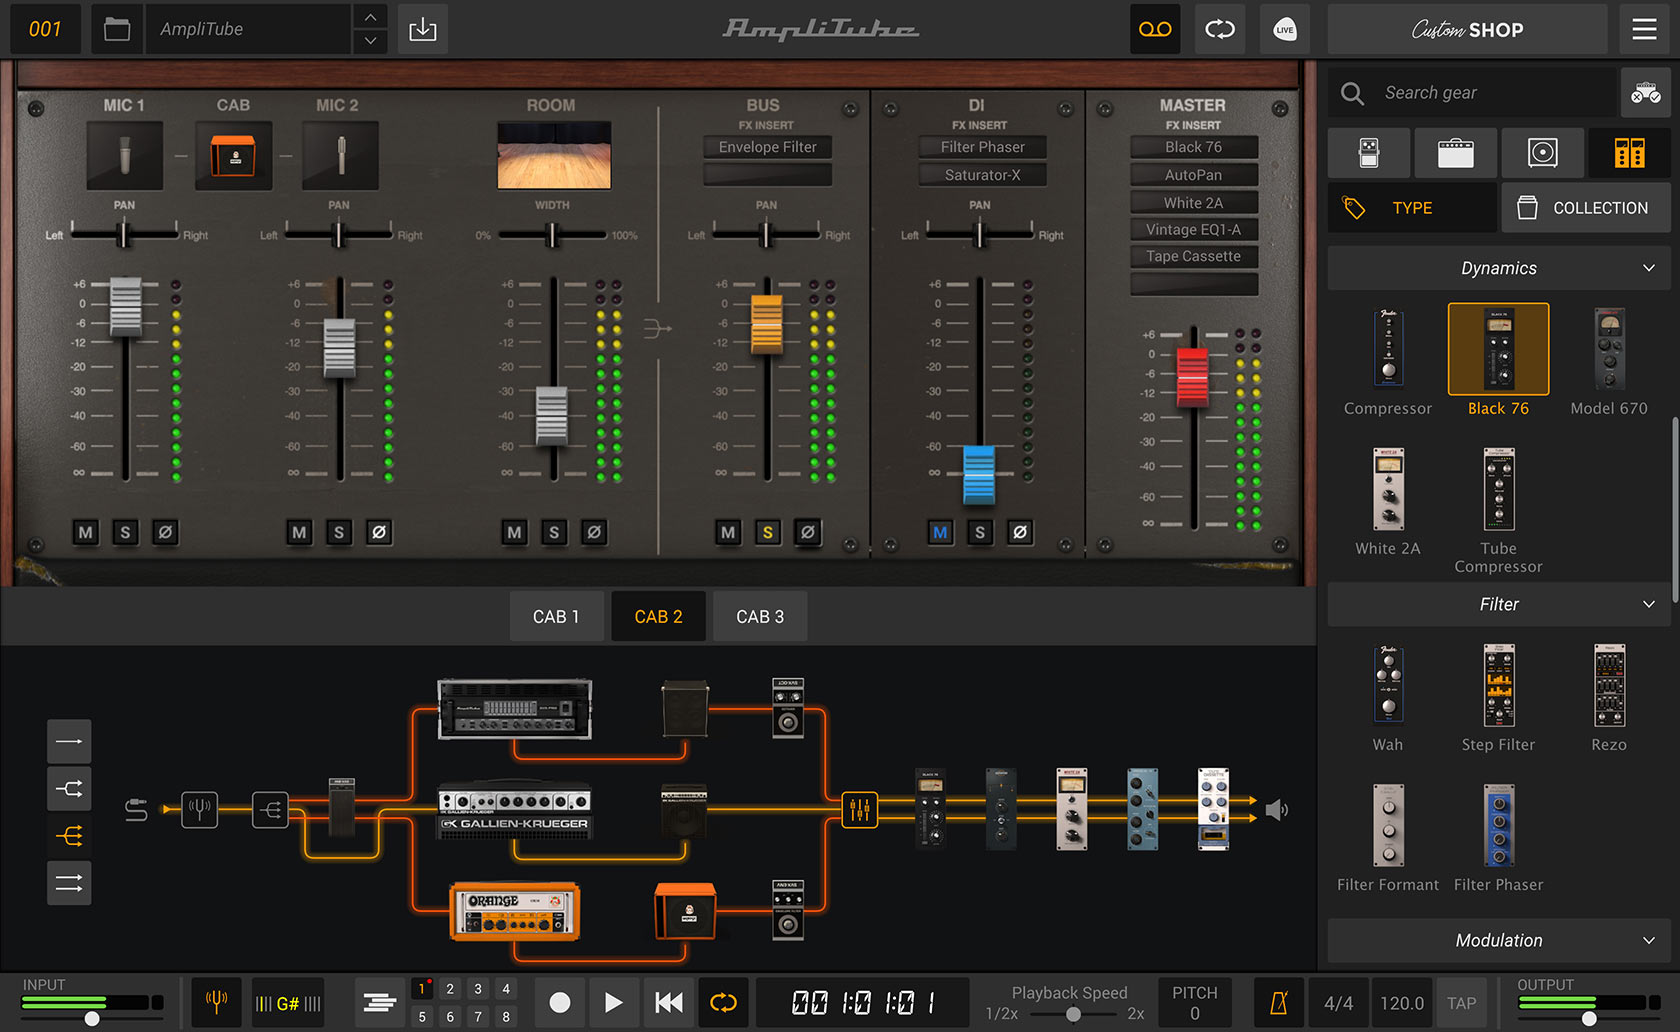 download the new version for ios AmpliTube 5.7.0